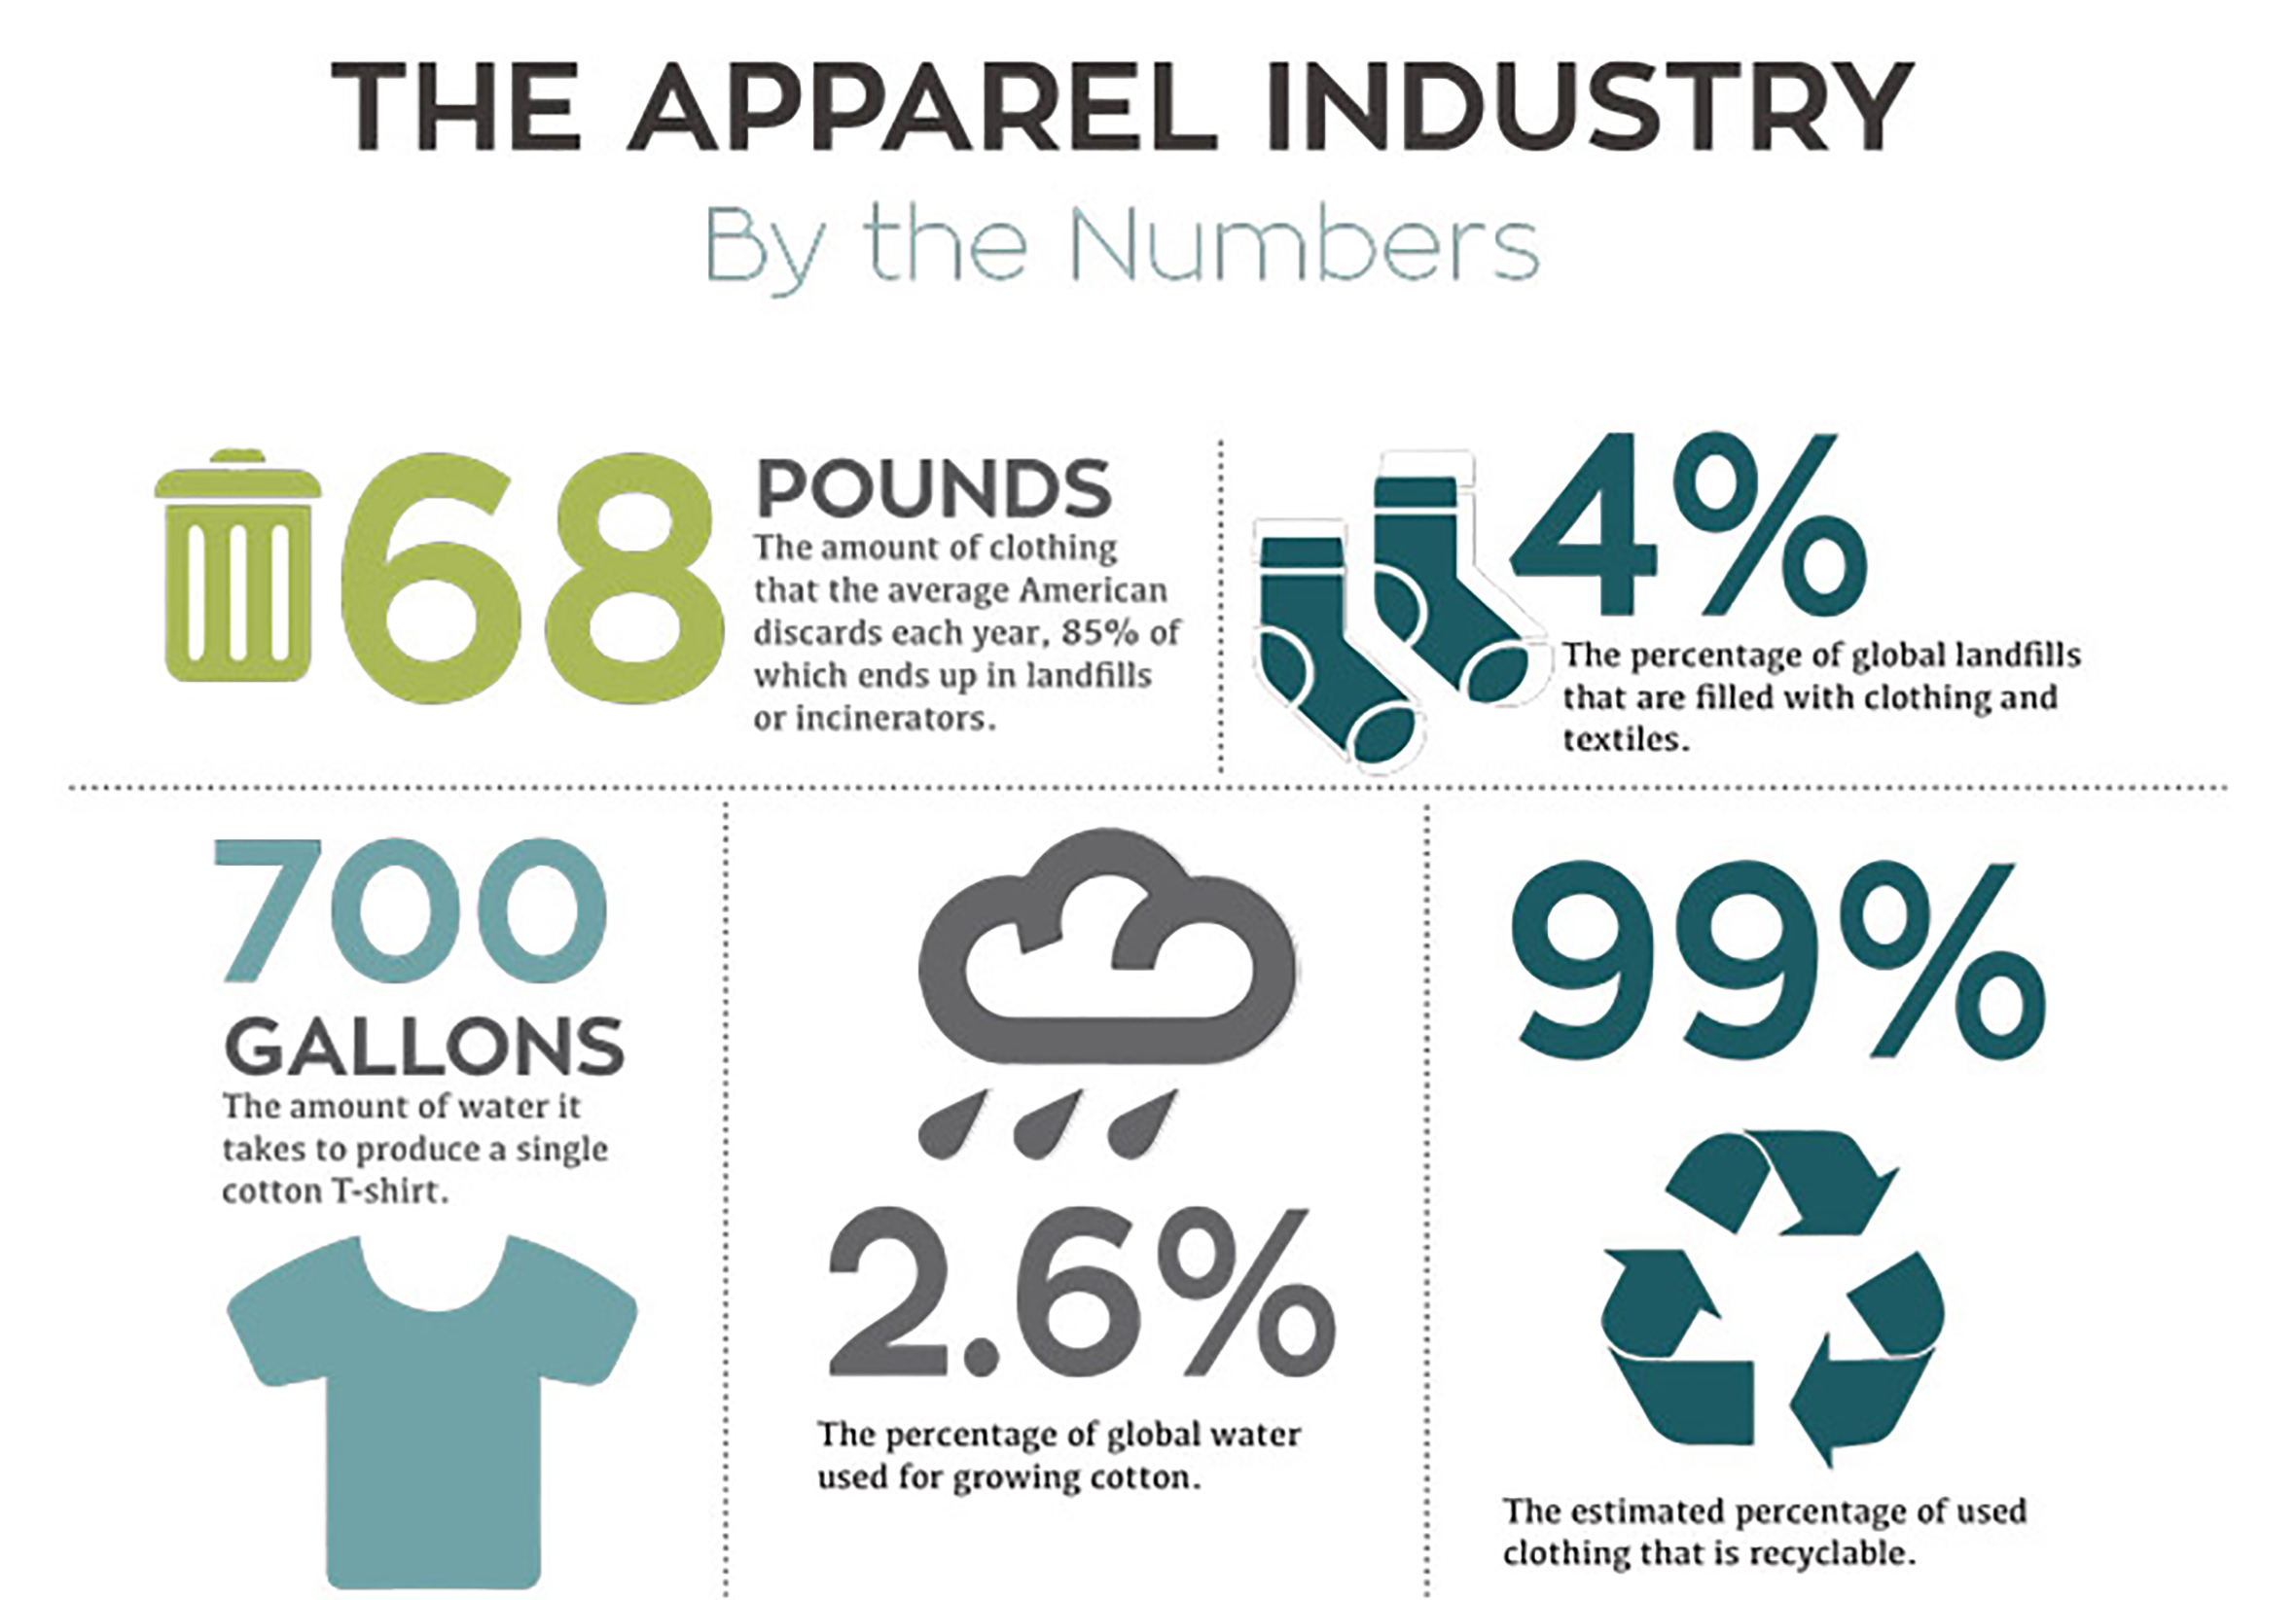 Info-graphic about the apparel industry